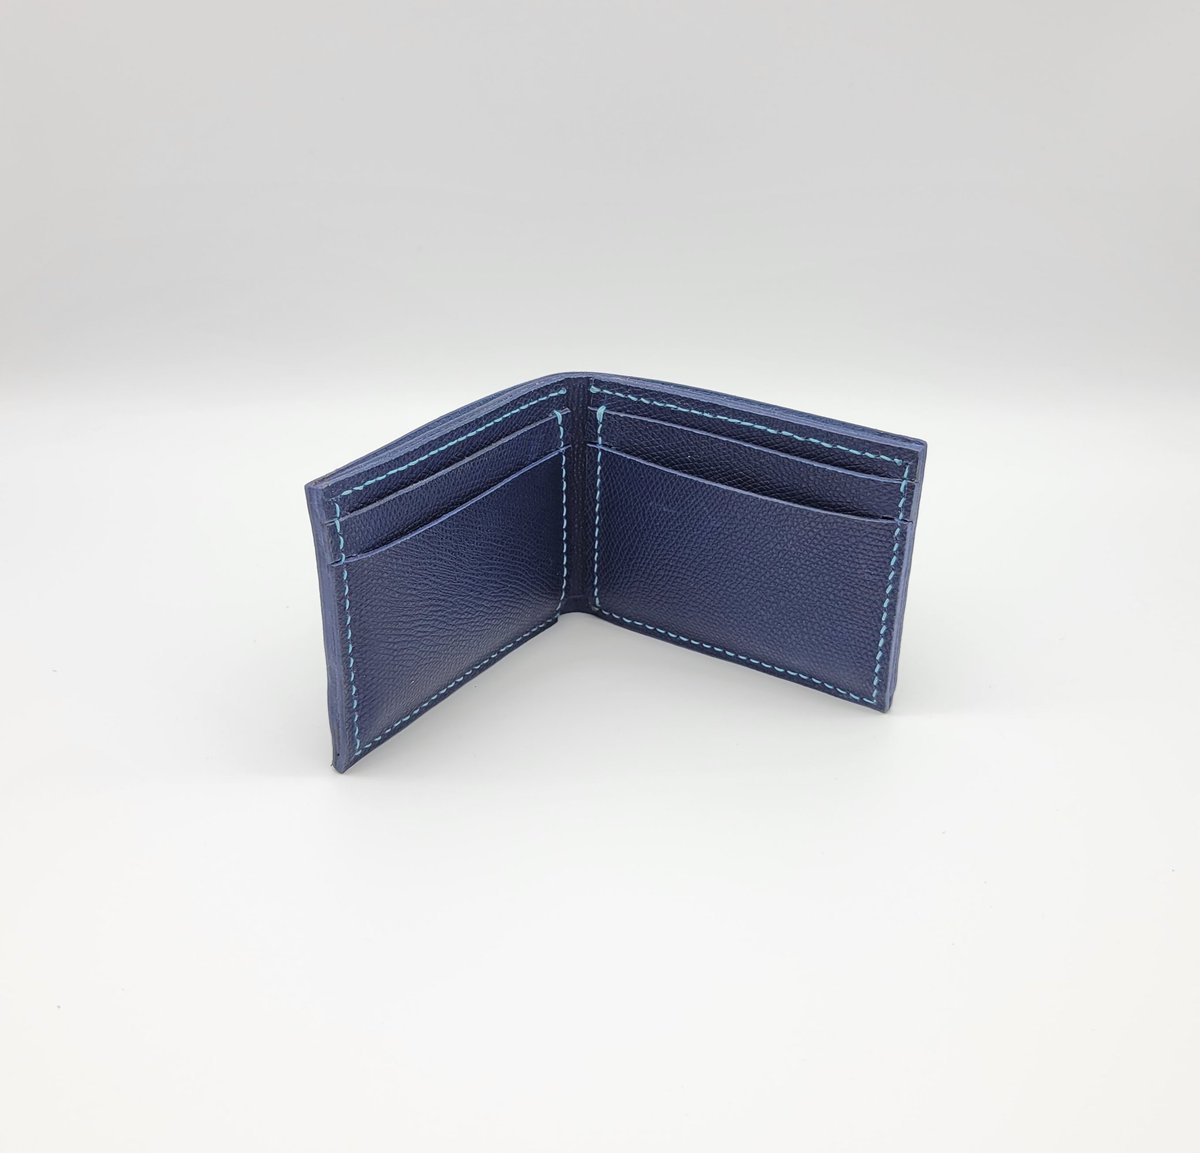 If you didn't know, we do wallets! Check out link in our bio to get this one of one for yourself! 🔹️

#leatherwallet #menswallet #marcscott #thirstythursday #hoppywednesday #handbagdesigner #pursedesign #bagdesign #bagaddicted #purselover #purseblog